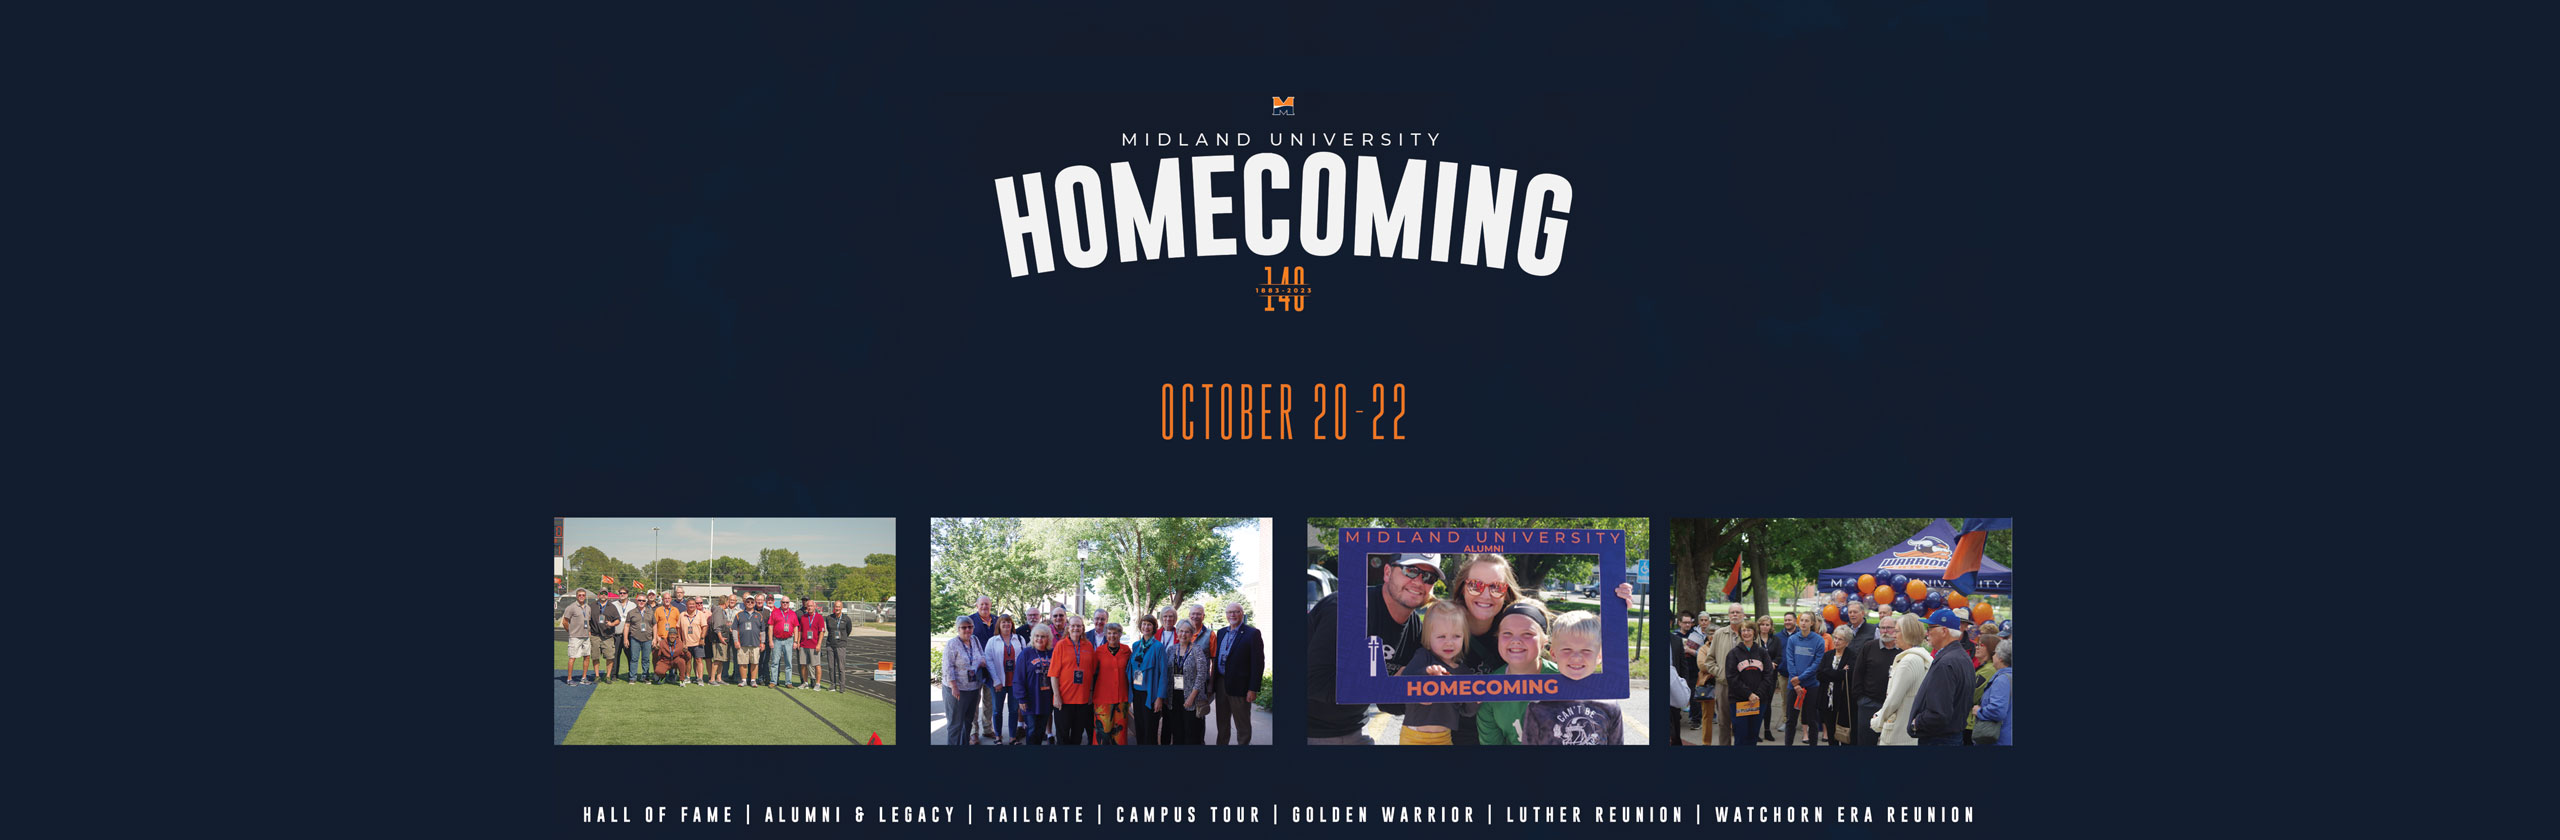 Midland University to Celebrate Alumni and Friends During